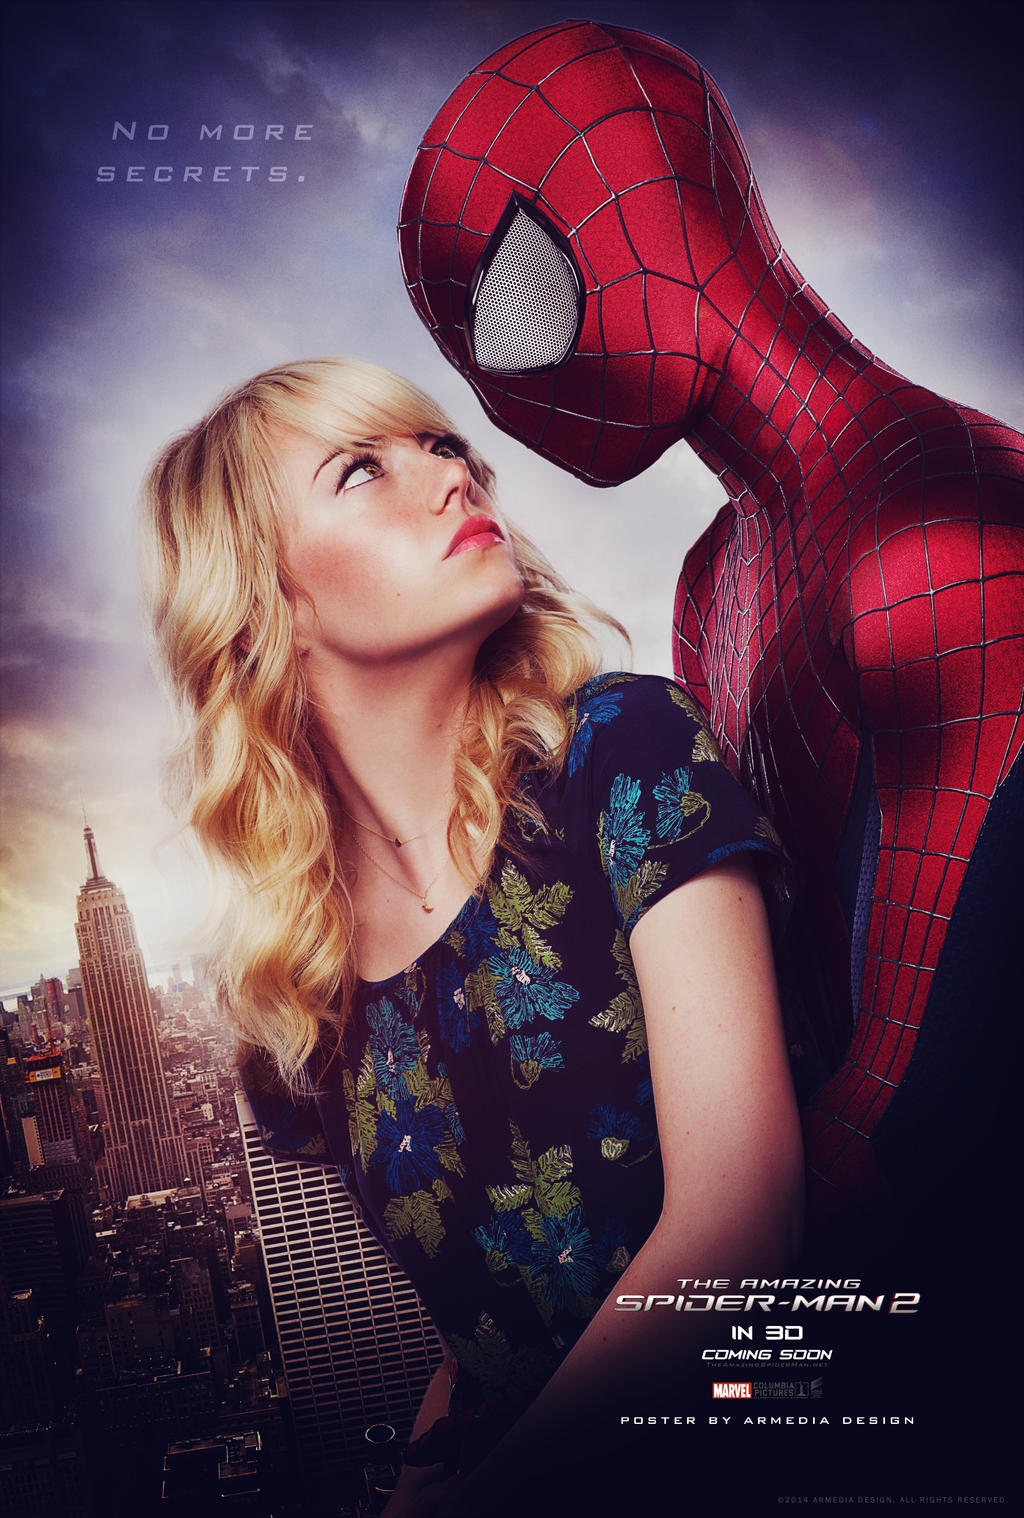 THE AMAZING SPIDERMAN 2 by alemarques21 on DeviantArt